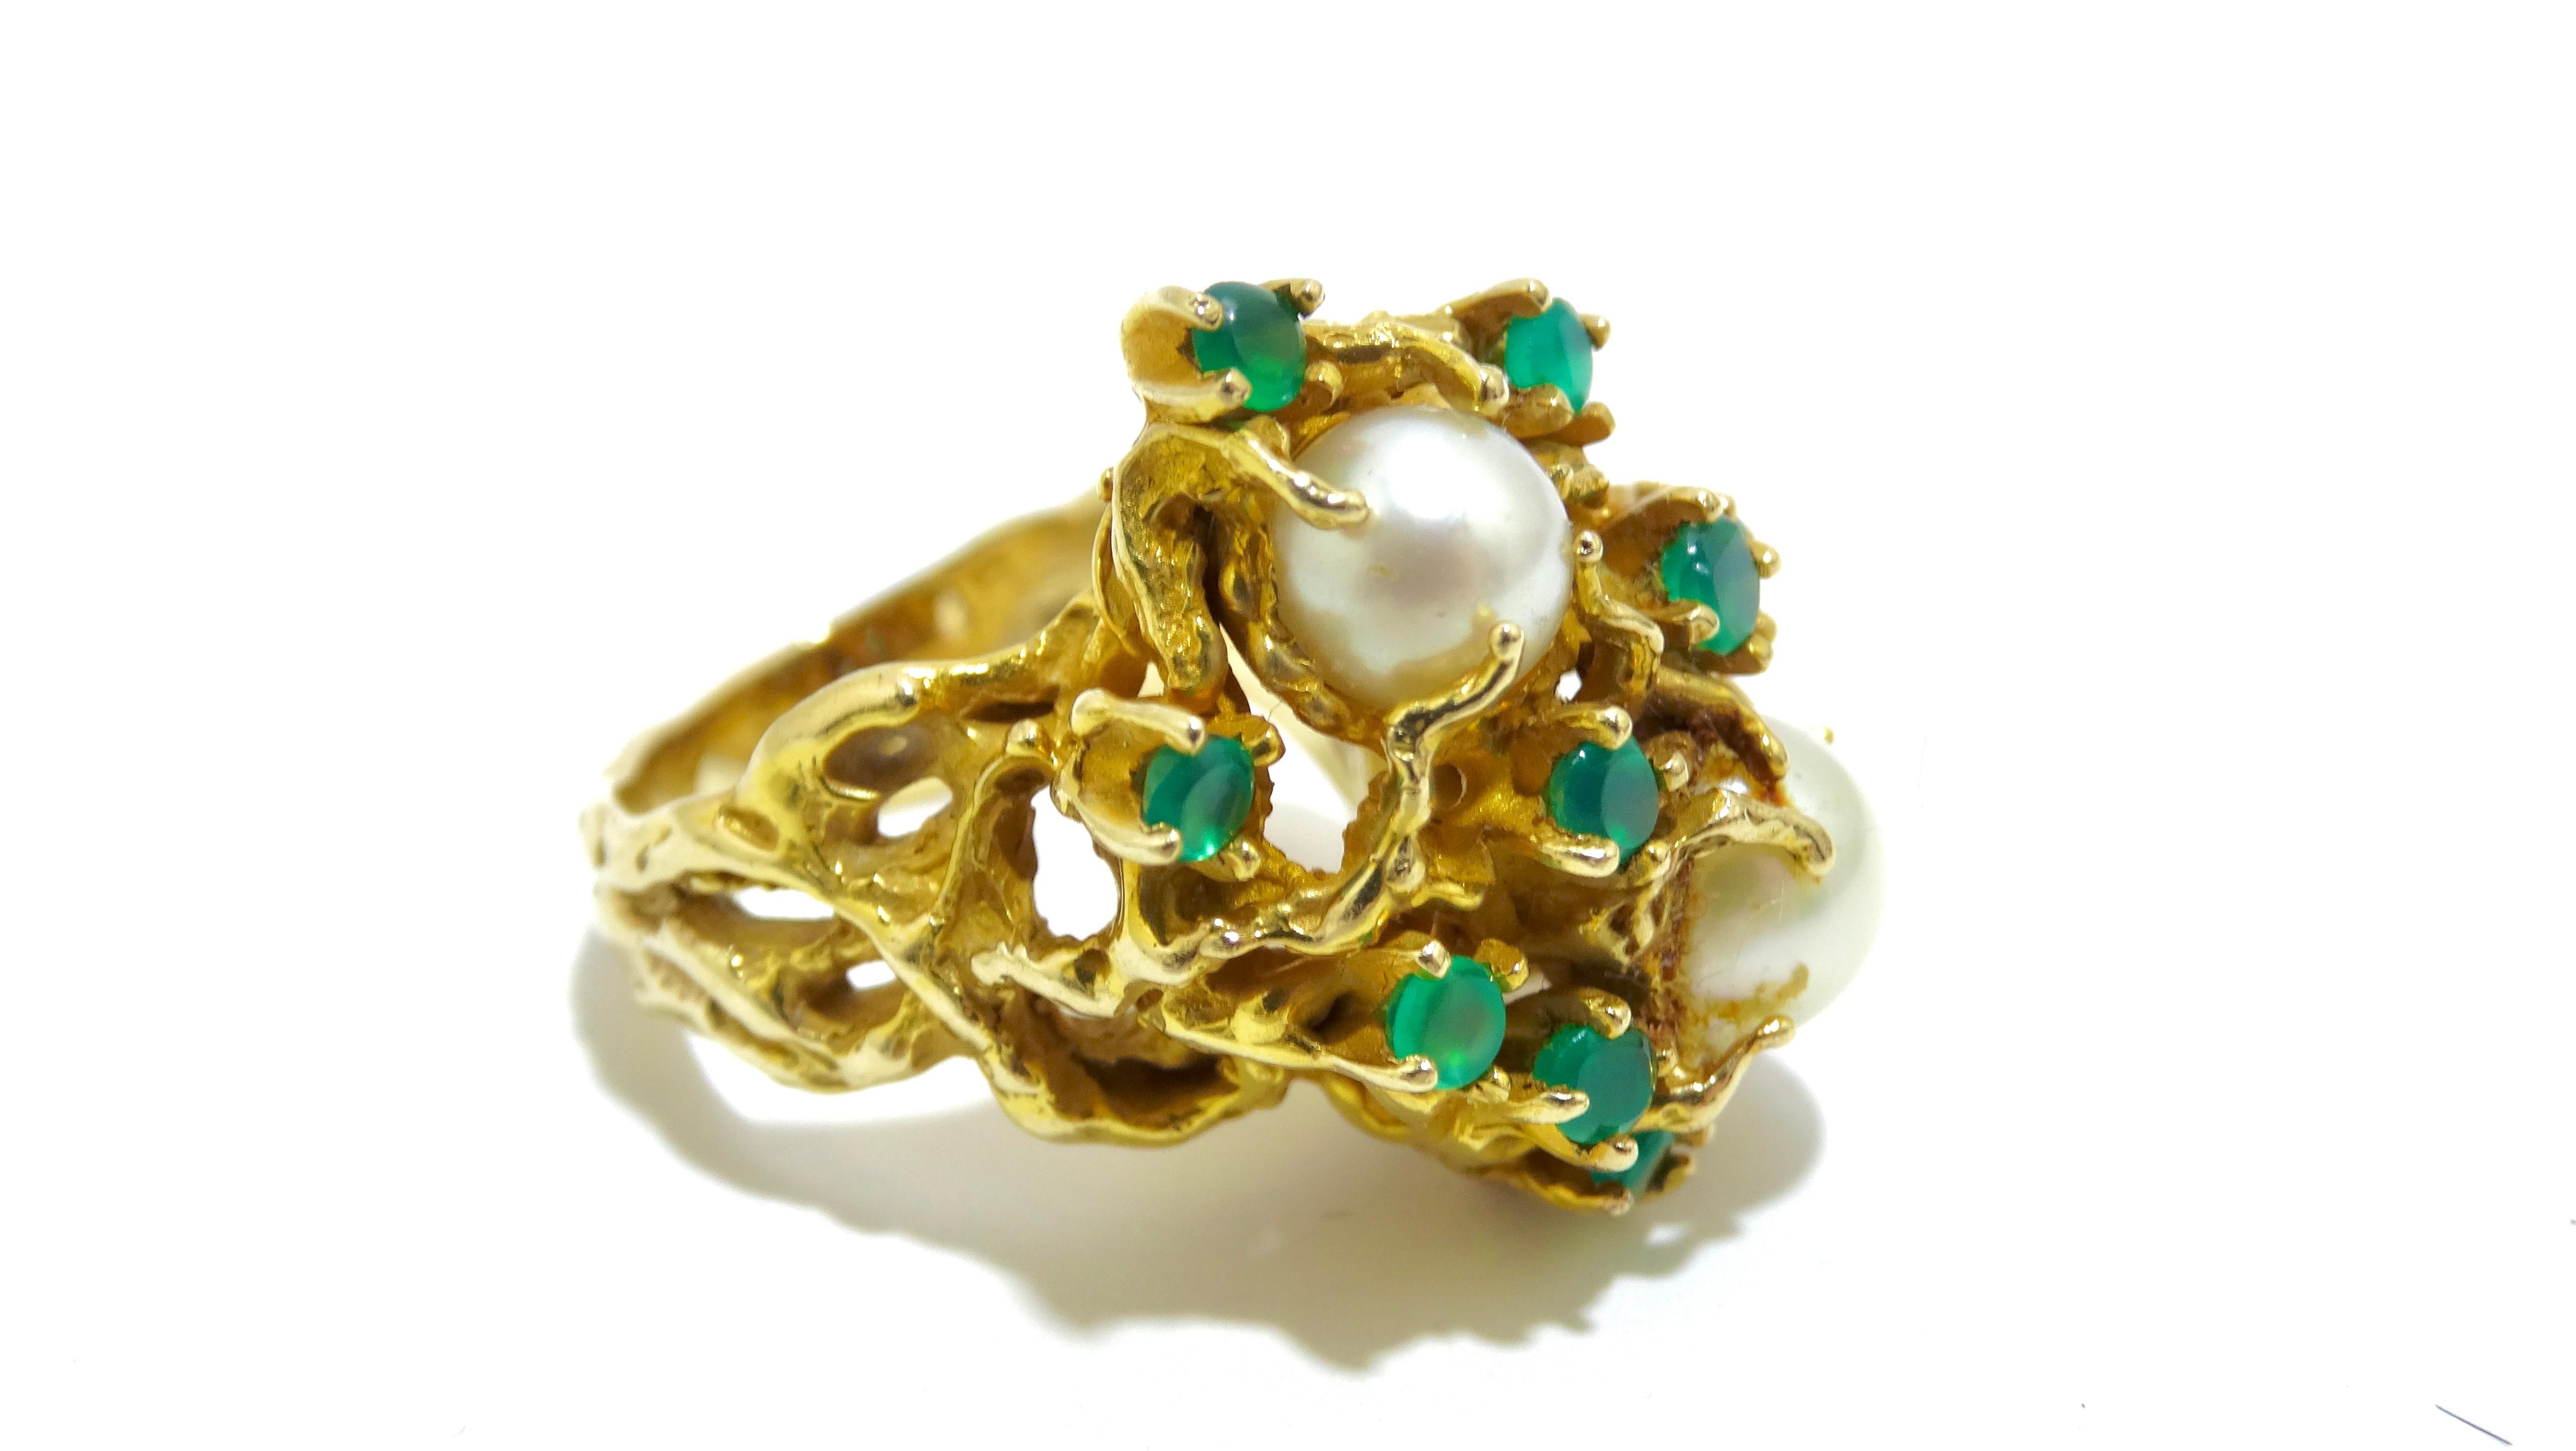 This 70's cocktail ring is the center of attention when you accessorize the right way. This ring has an intricate woven-look gold detailing, 10 emerald stones, and two large pearls. Pair it with a classic little black dress from Gucci. 

Length: